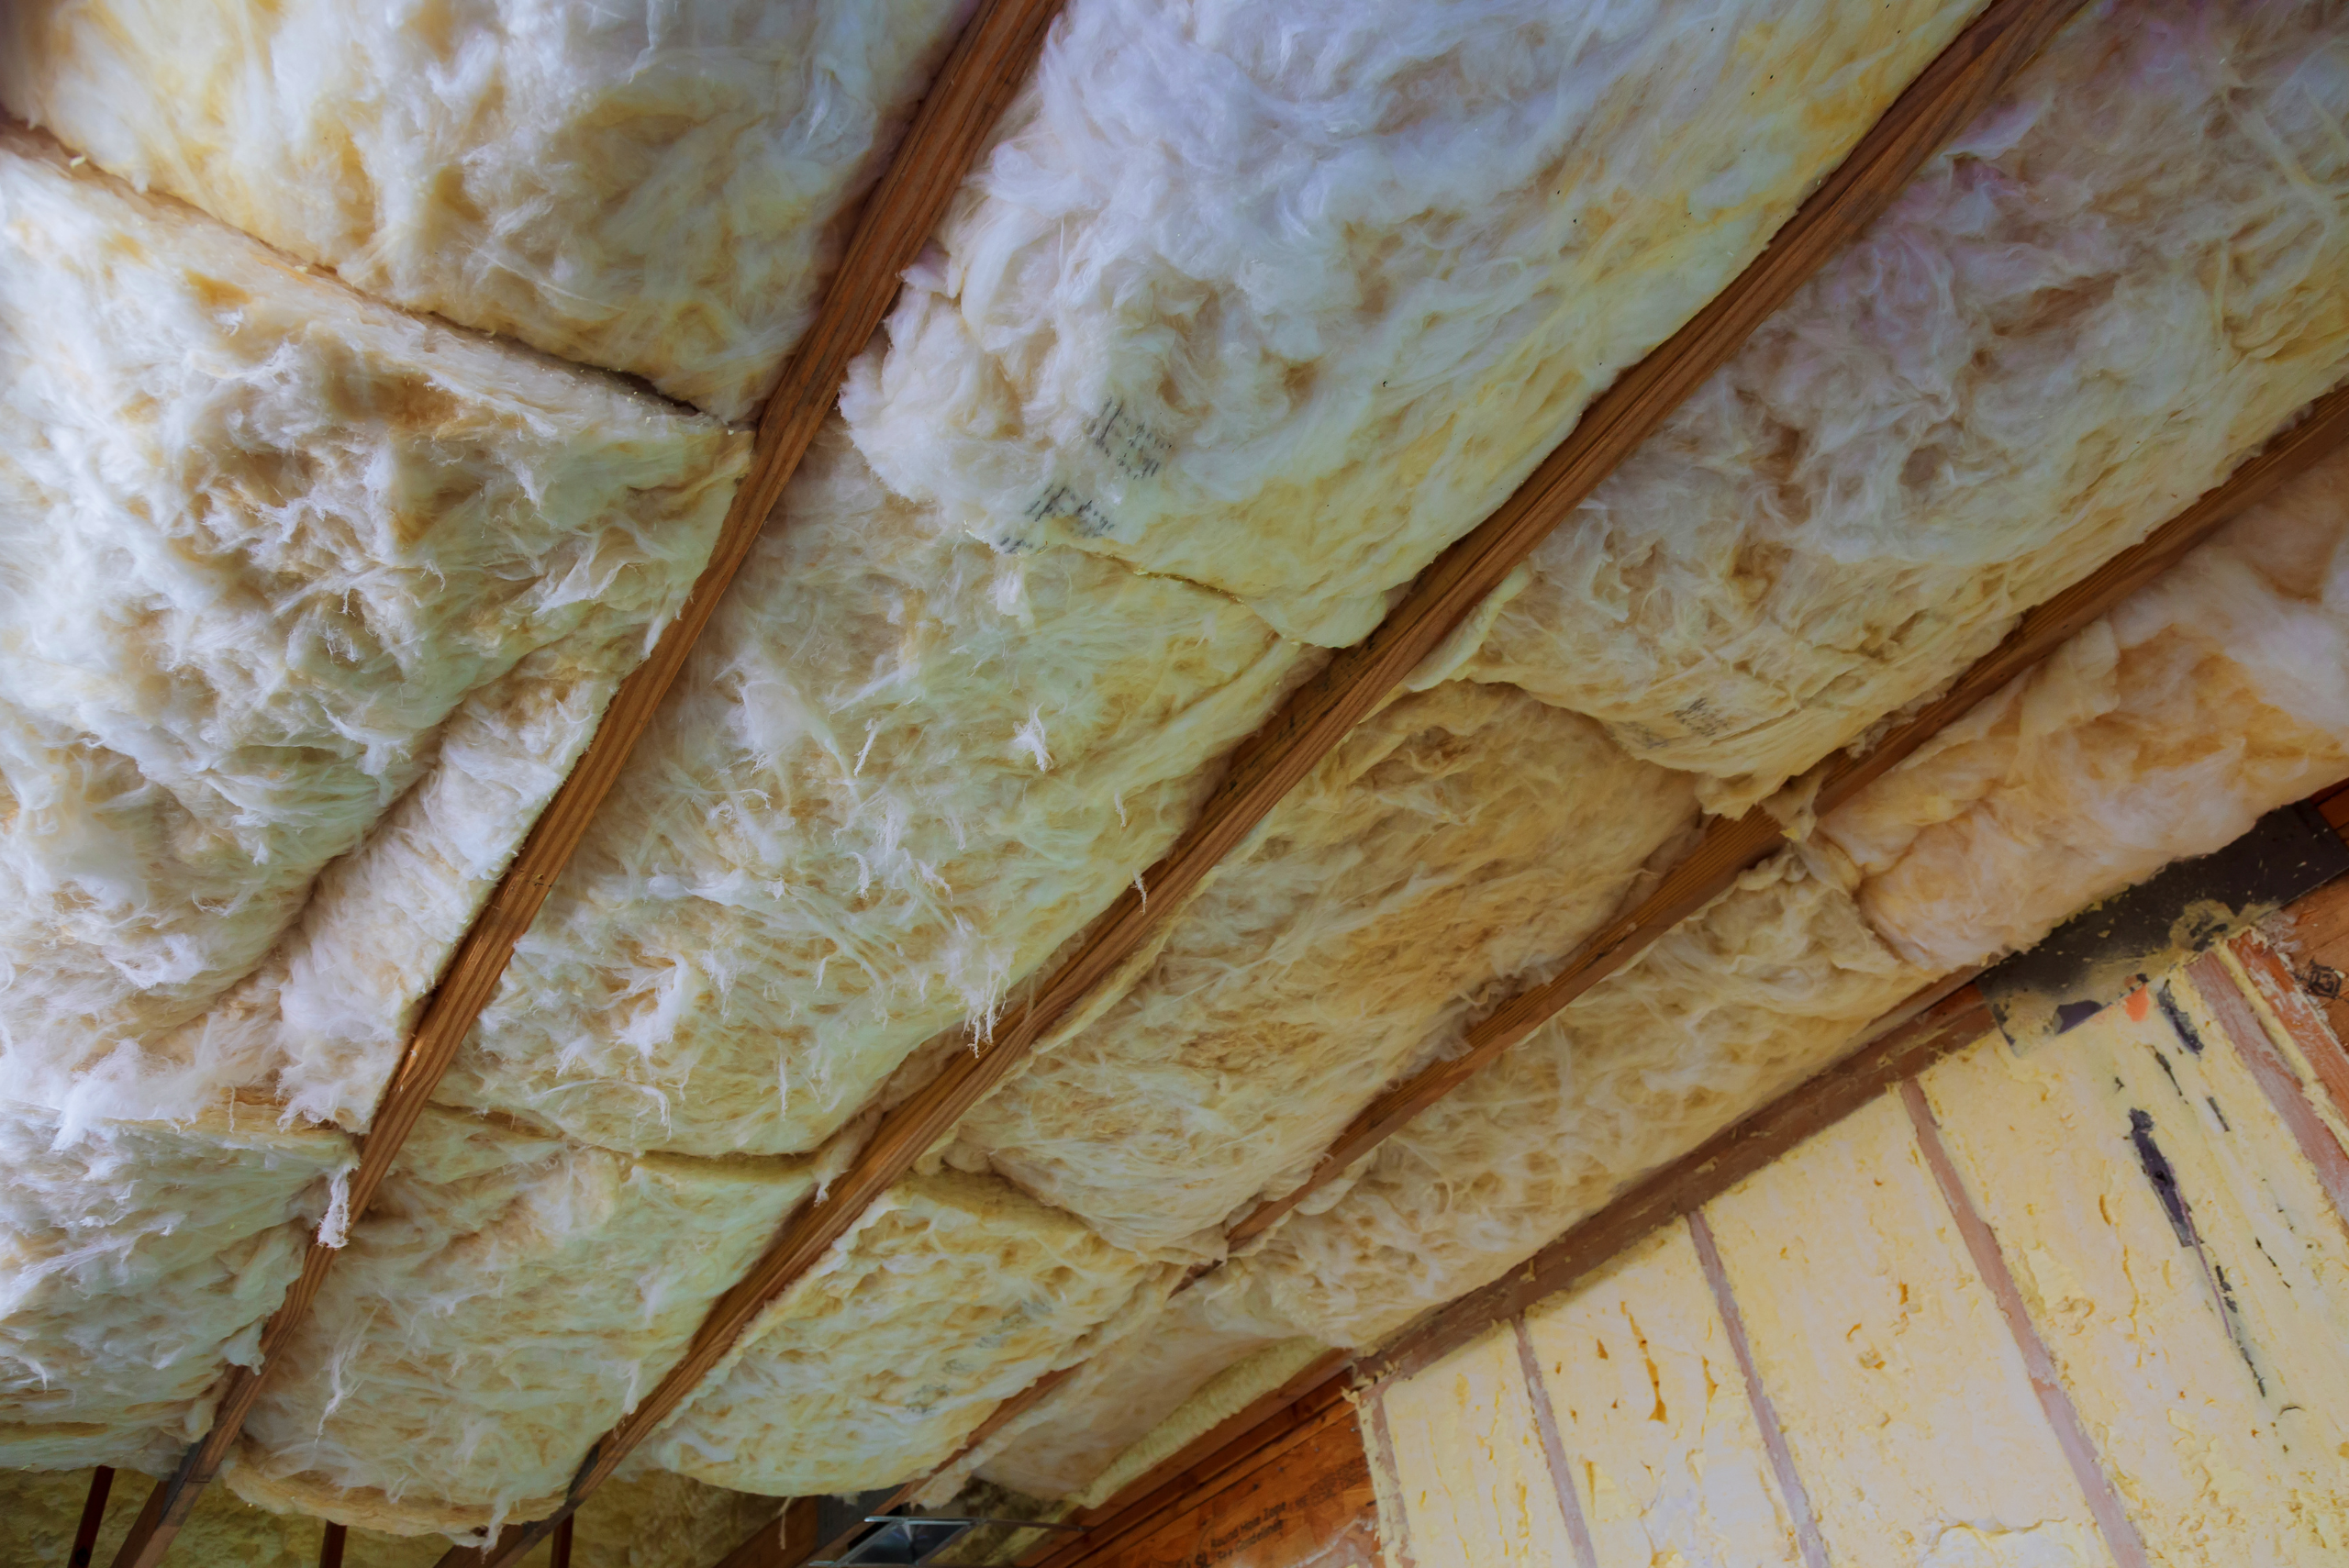 A basement ceiling with insulation packed between the beams for sound proofing.